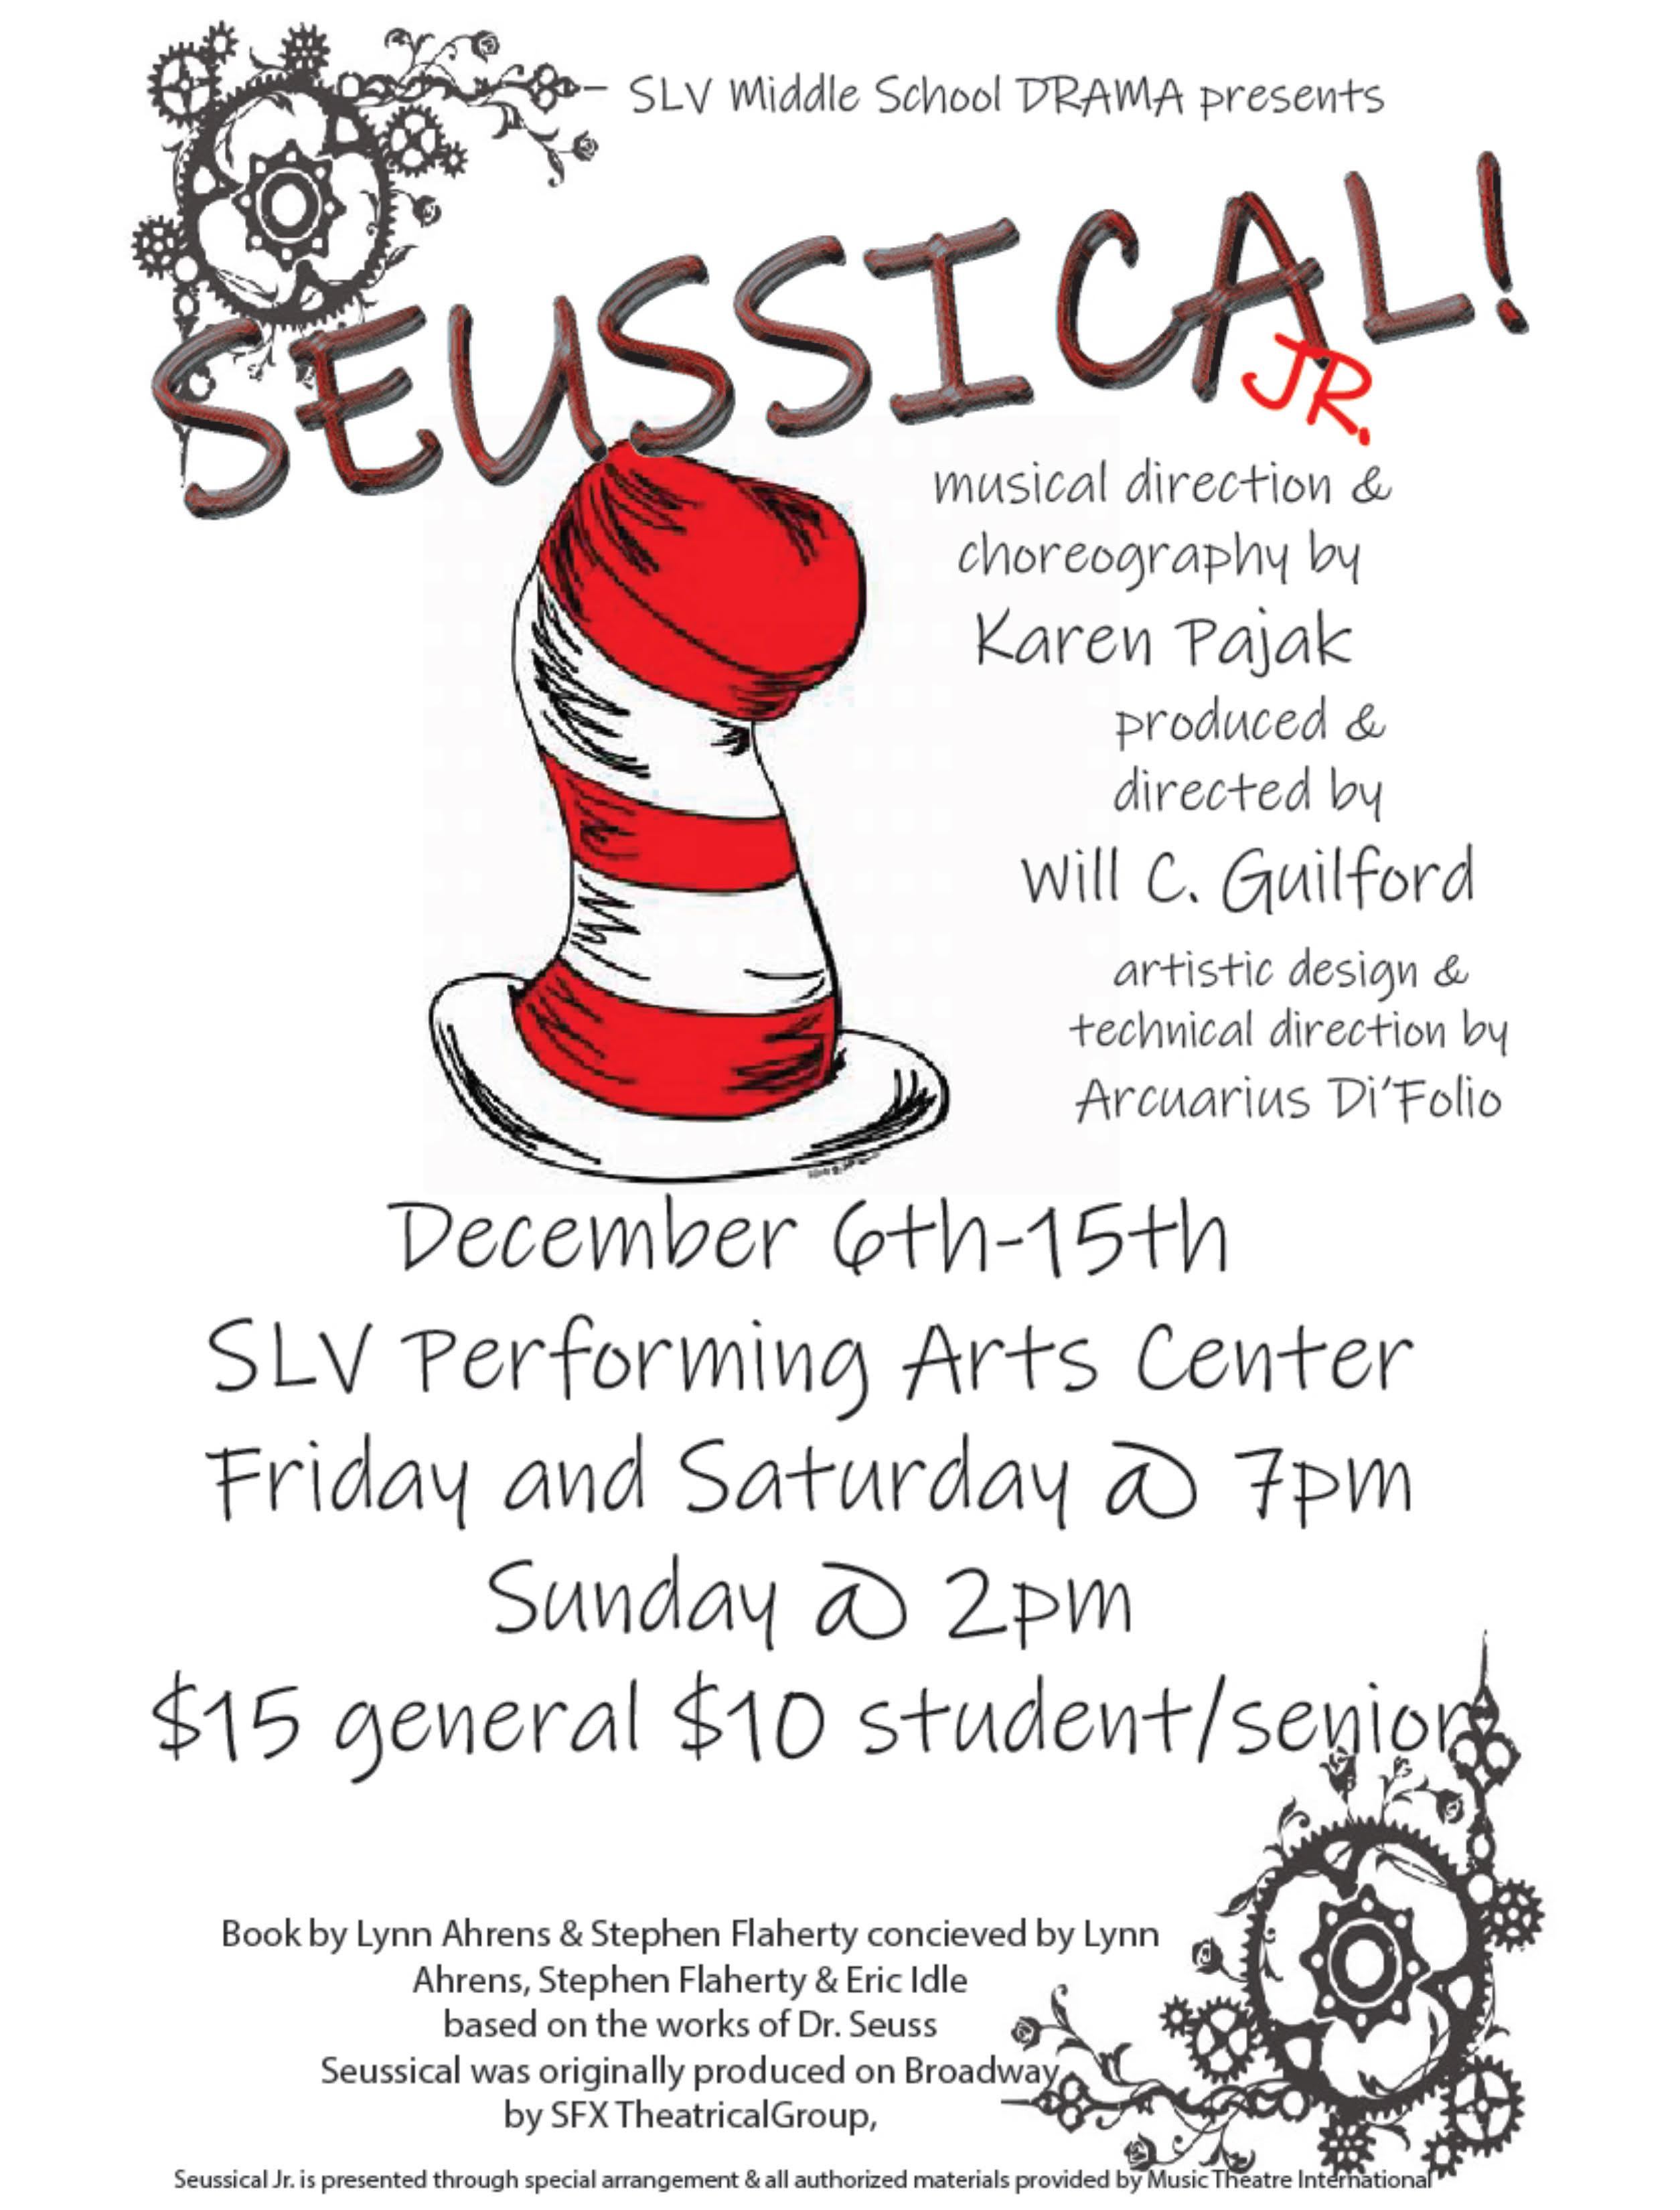 seussical poster; email wguilford@slvusd.org for information